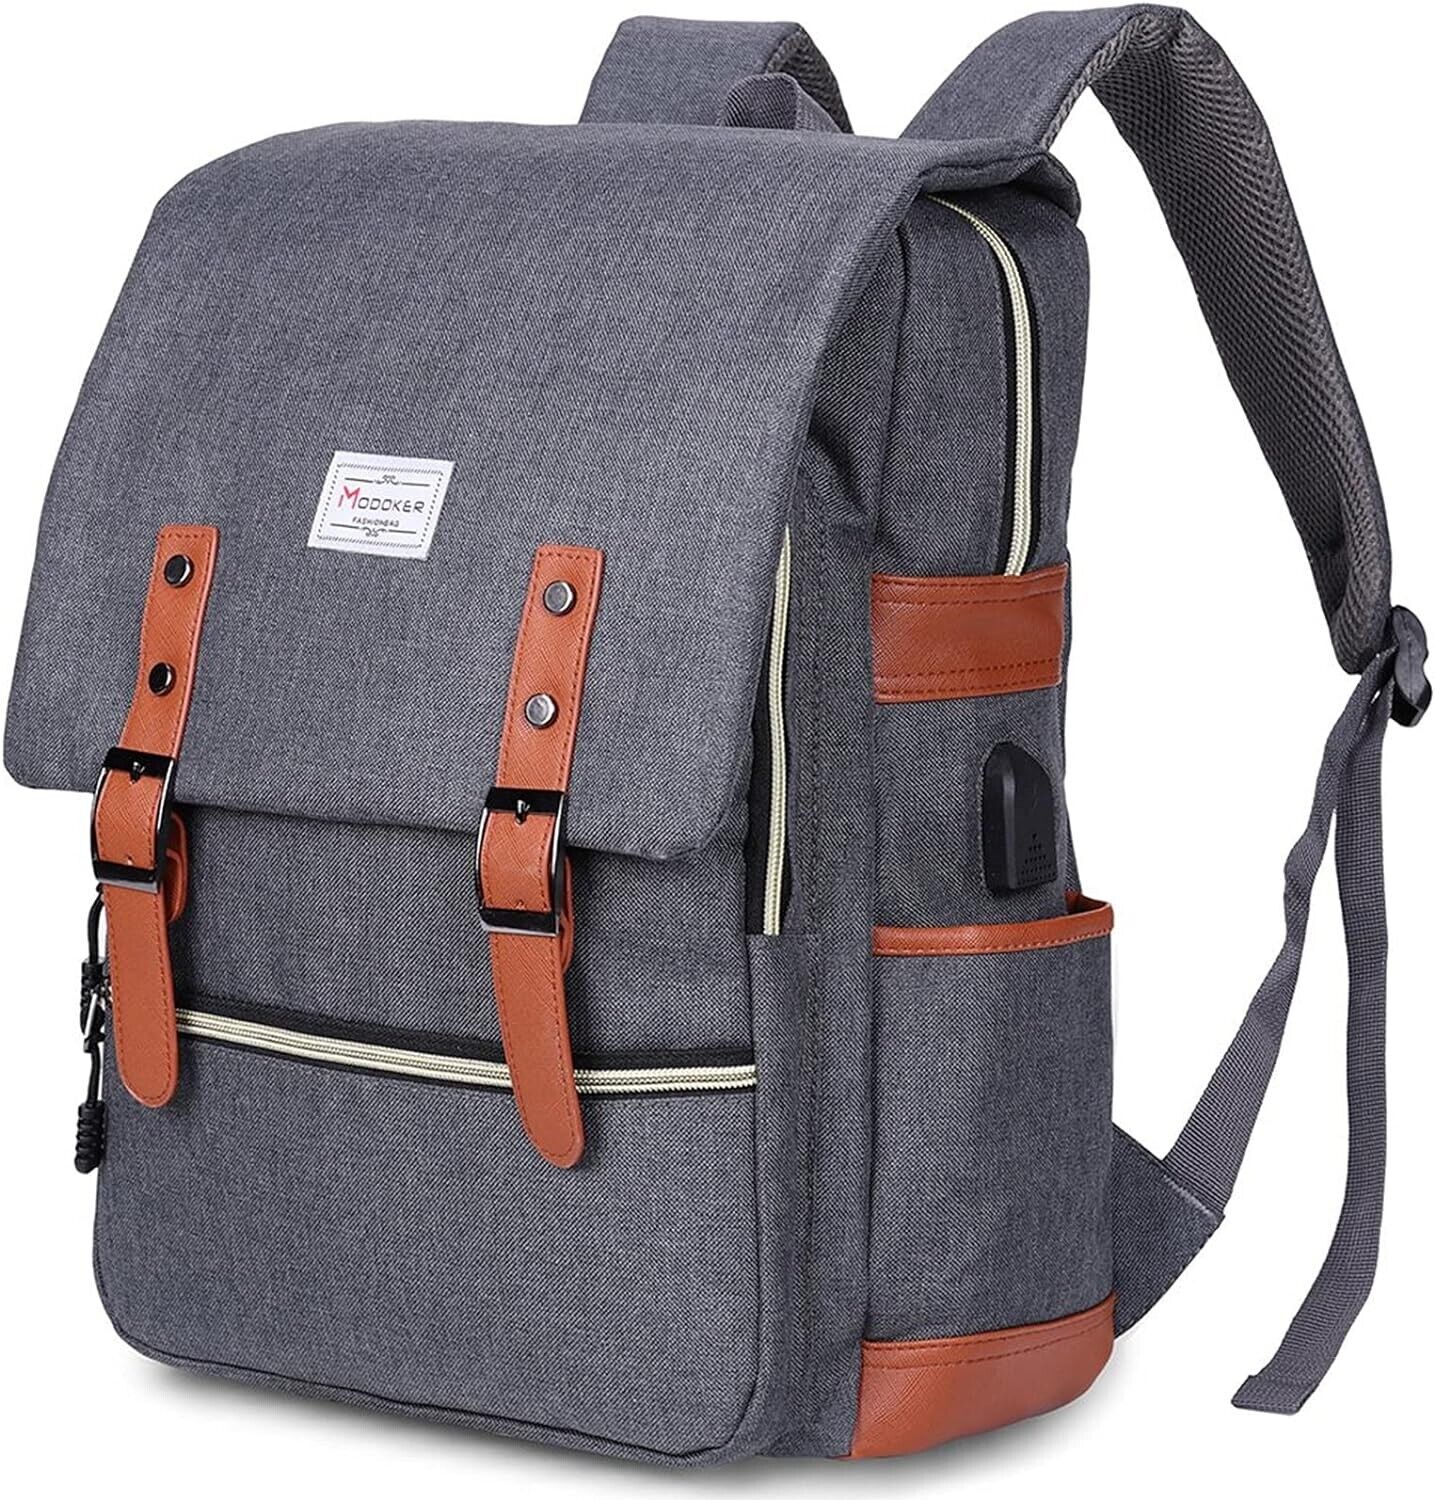 Modoker Vintage Laptop Backpack with USB Port for Men or Women Gray NEW In Box